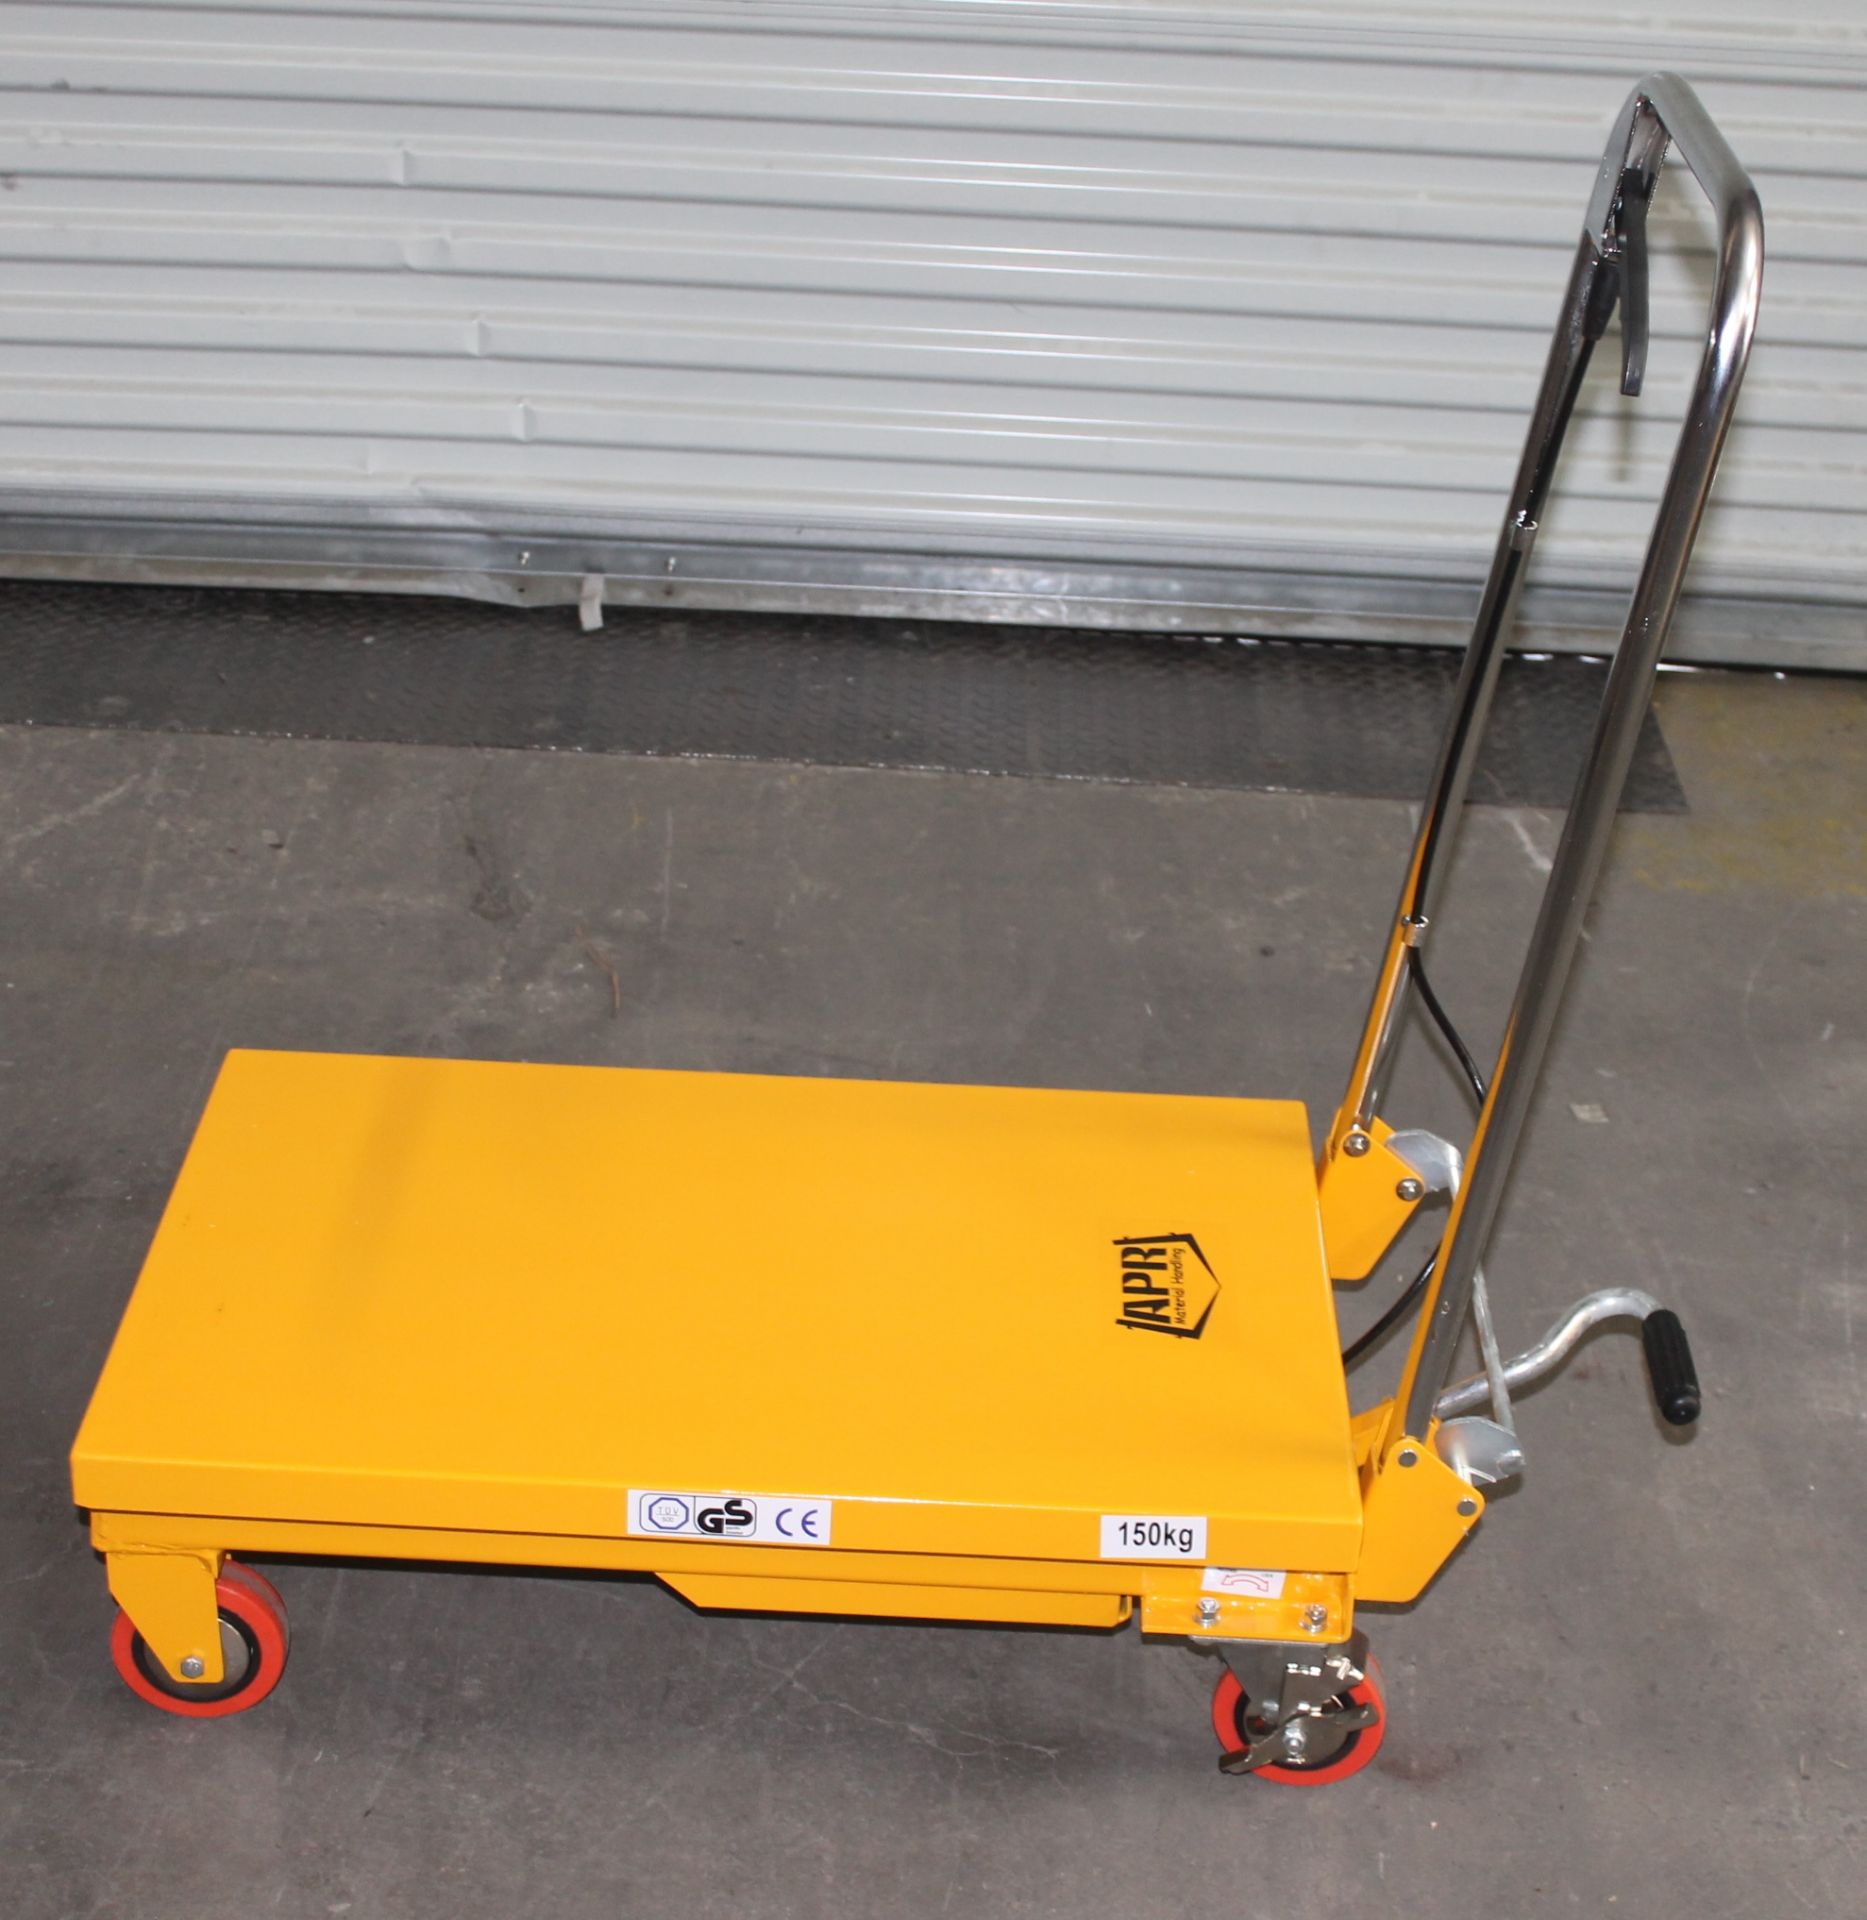 330 LBS CAP. ROLLING SCISSOR LIFT TABLE, CAPACITY: 330 LBS., MAX HEIGHT: 29.13", TABLE SIZE: 29"L - Image 2 of 5